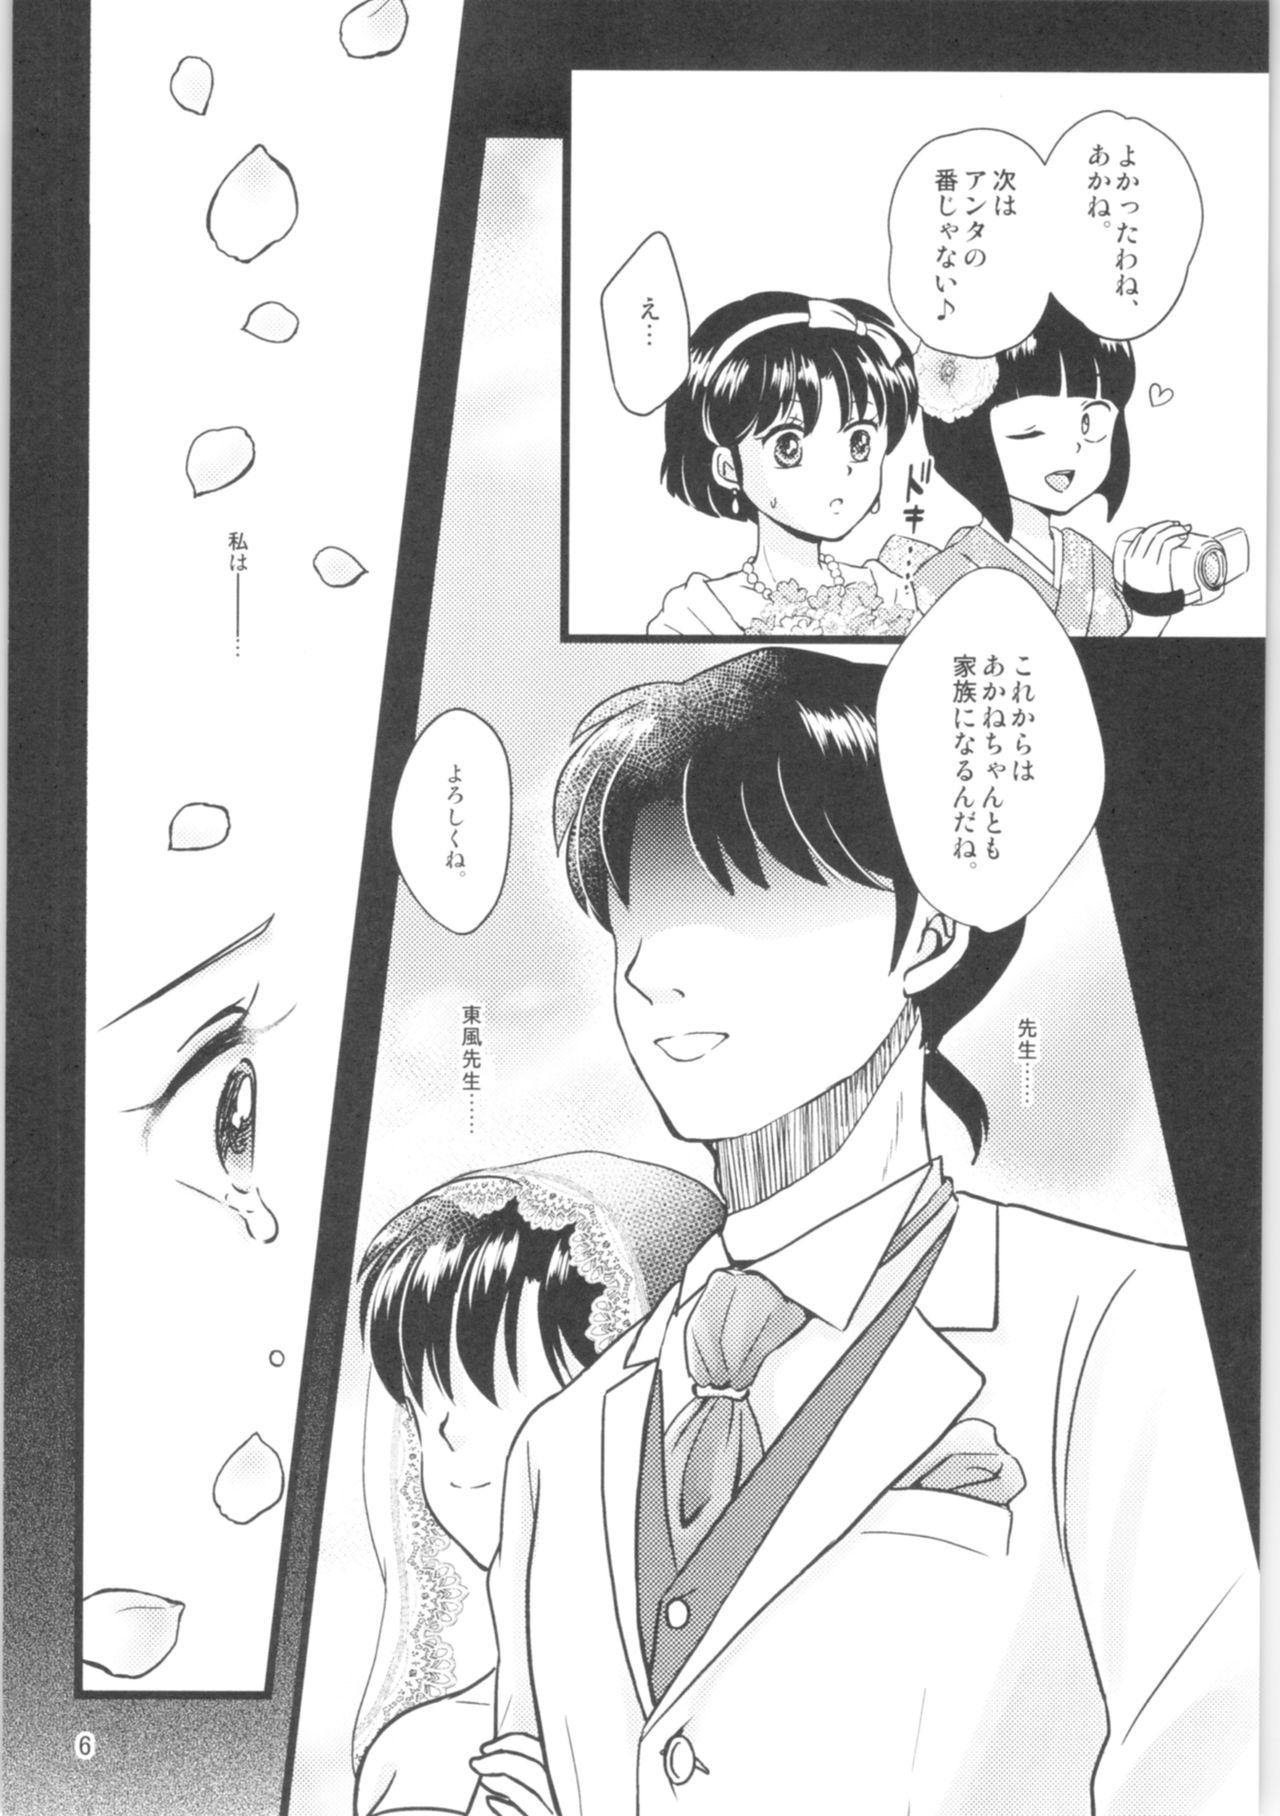 Class Distorted Love - Ranma 12 India - Page 5